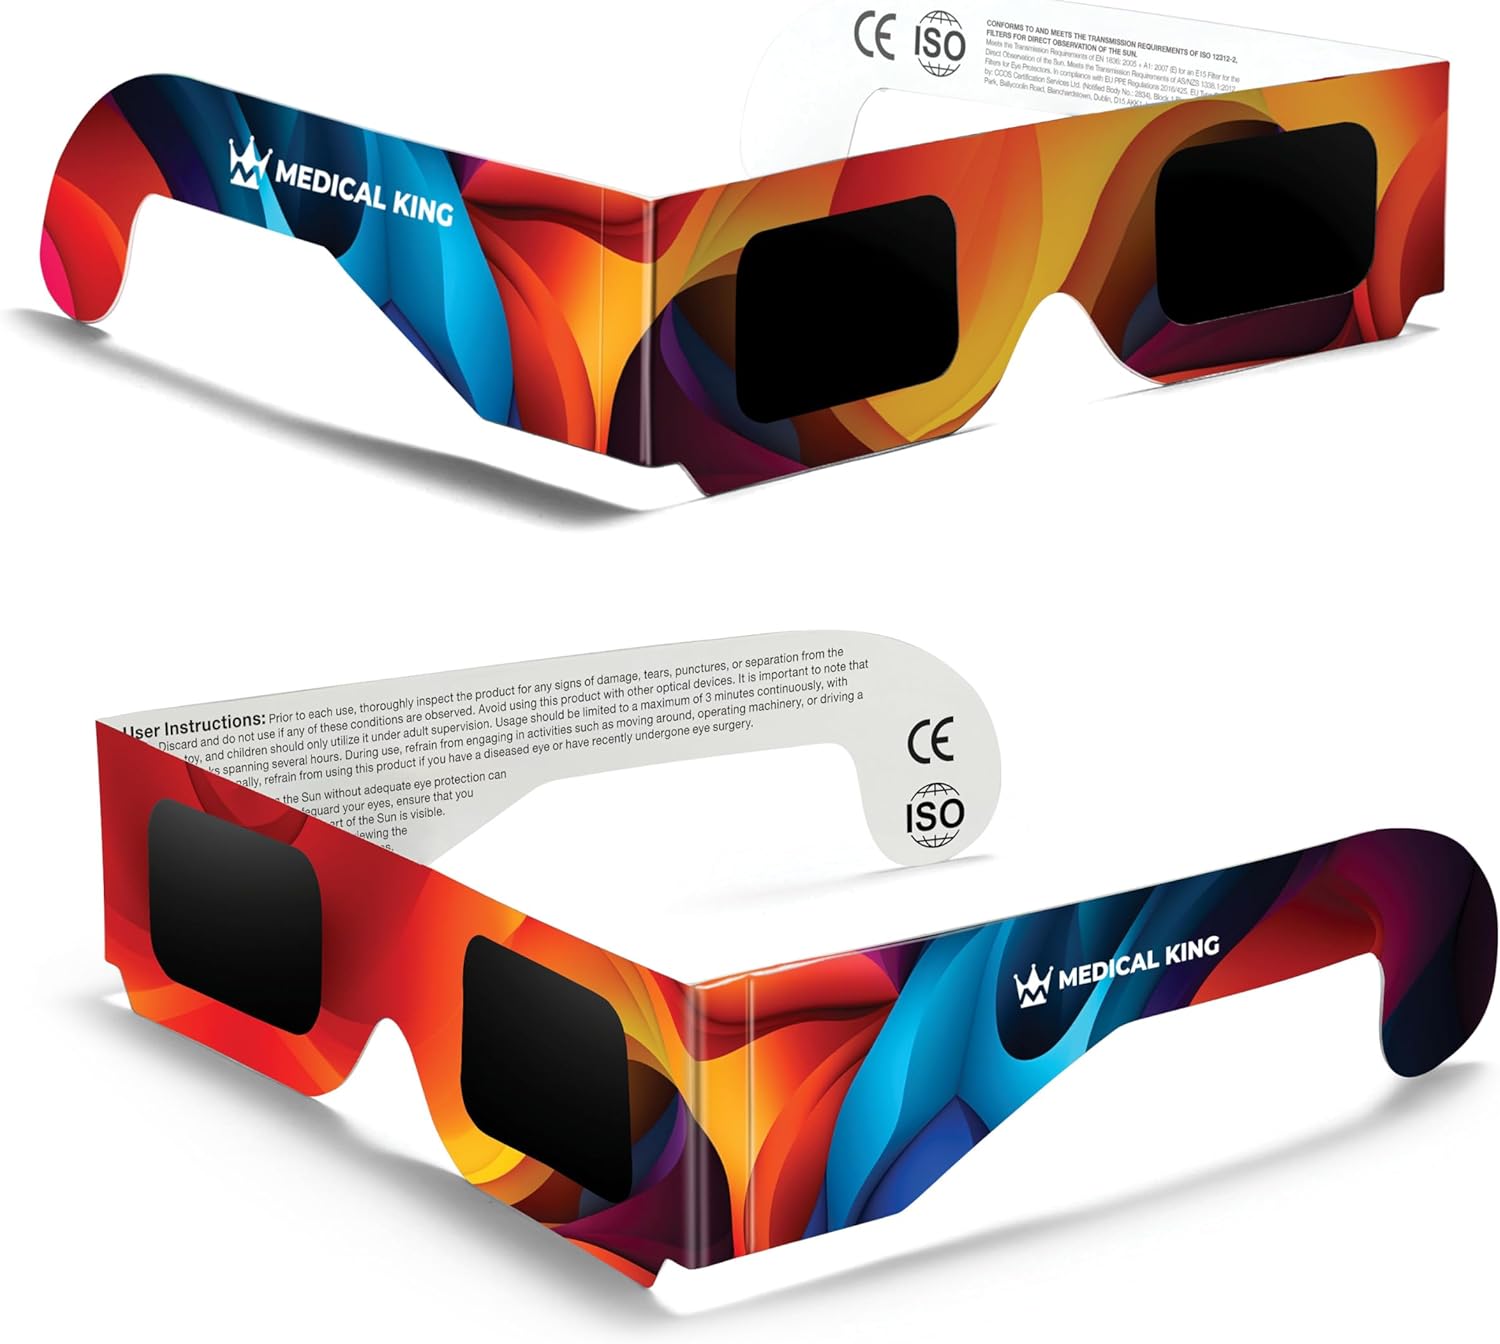 Solar Eclipse Glasses 2, 5, 10, 20, 50, 100 pack - 2024 CE and ISO